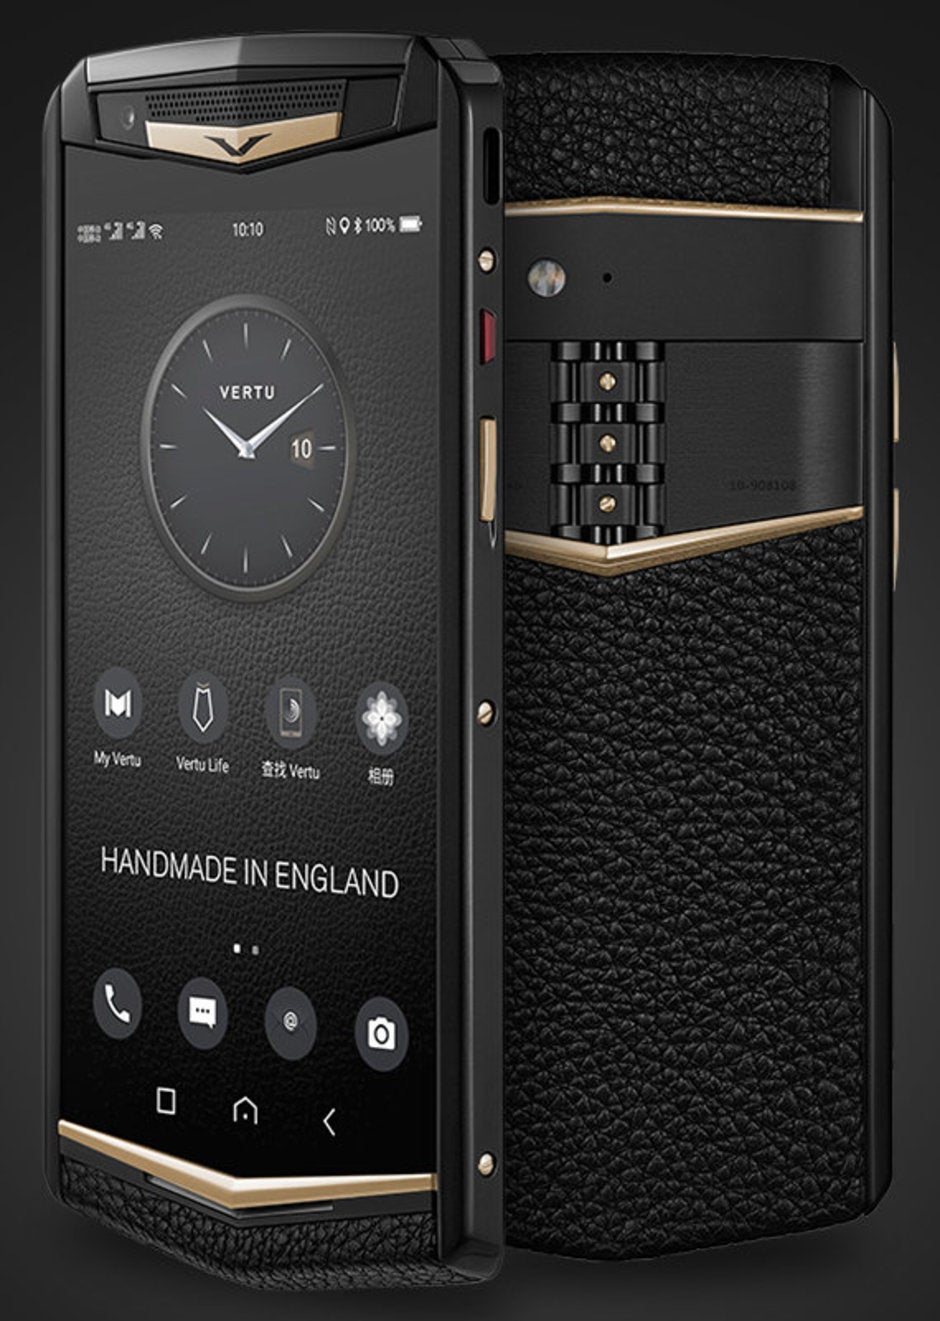 Vertu Aster P - Vertu rises from the dead with a $5,000 smartphone, the Aster P